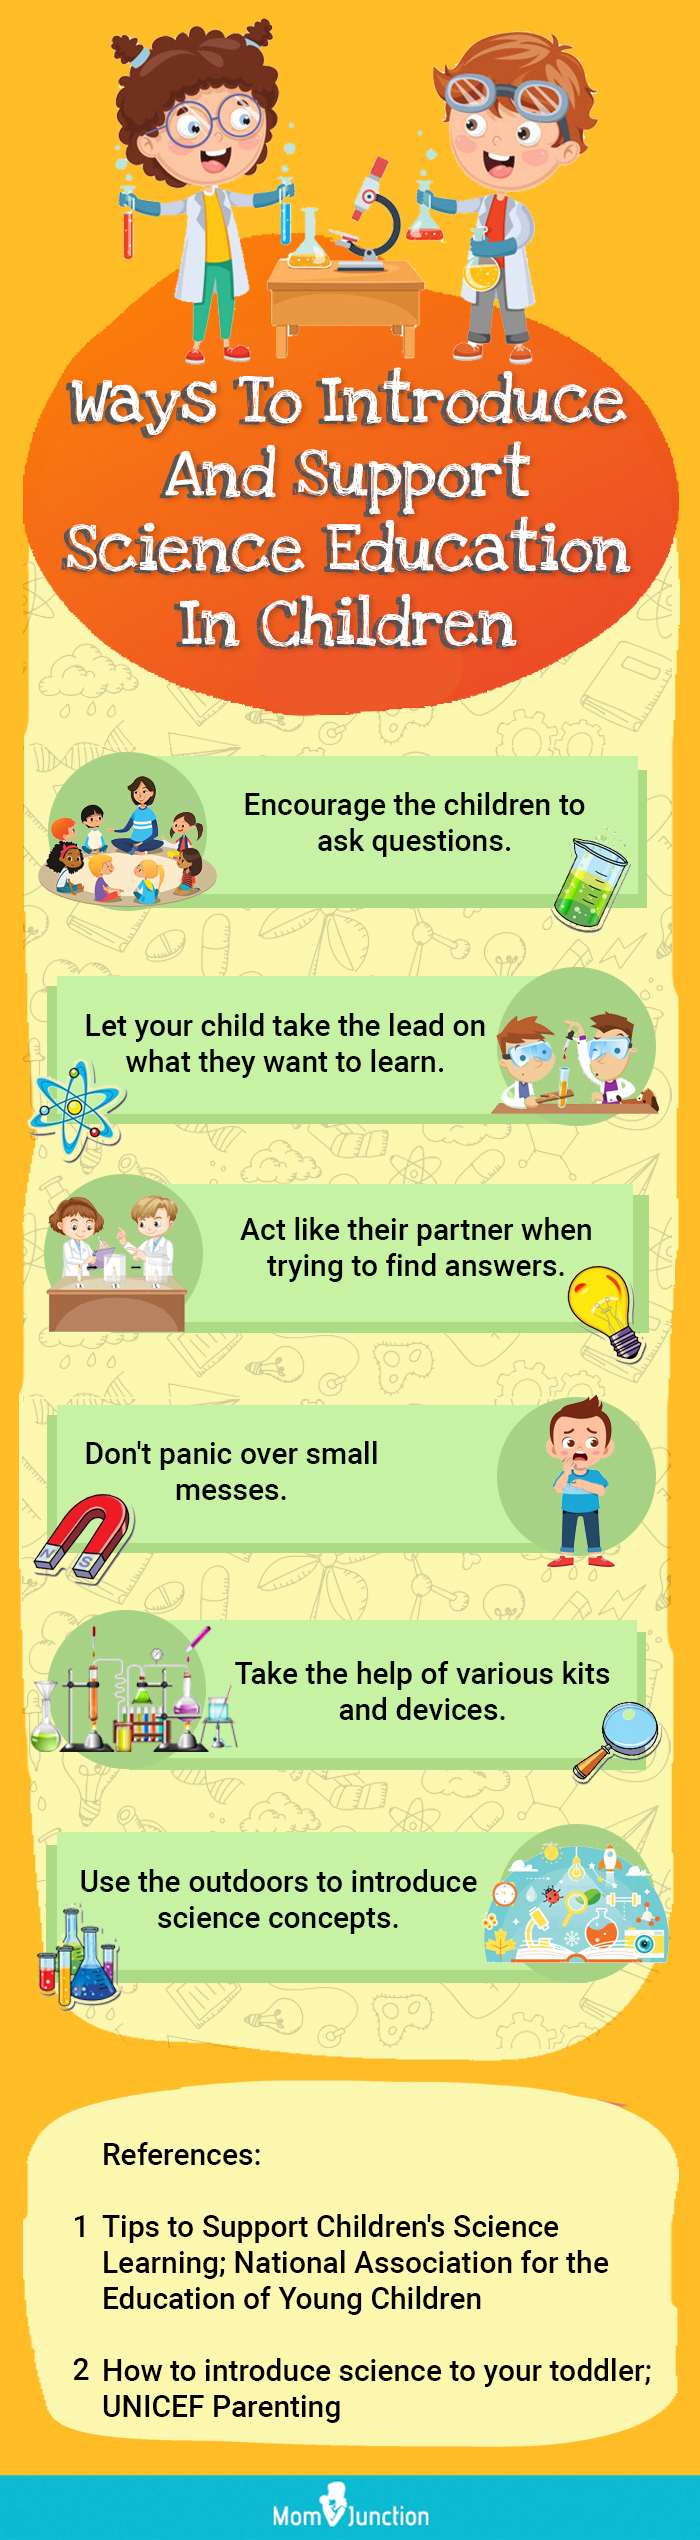 Ways To Introduce And Support Science Education In Children (Infographic)